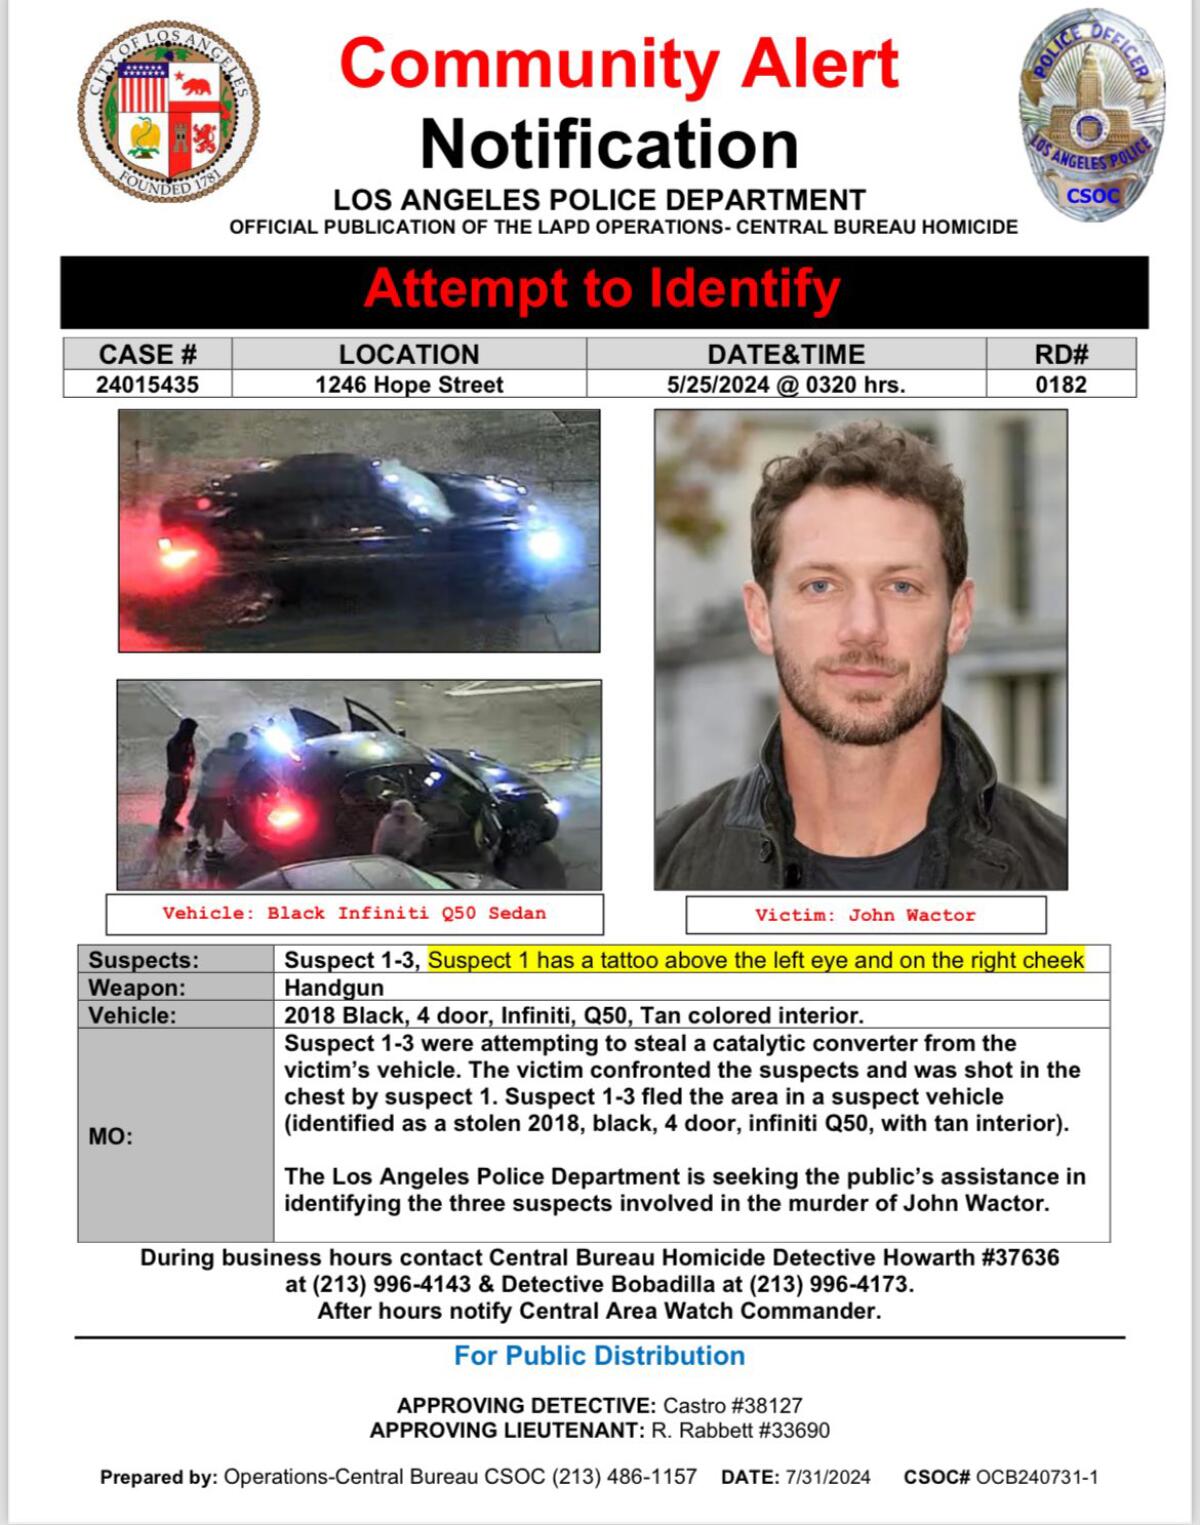 Community alert sheet shows images of several men around a car, a car and a man's face.